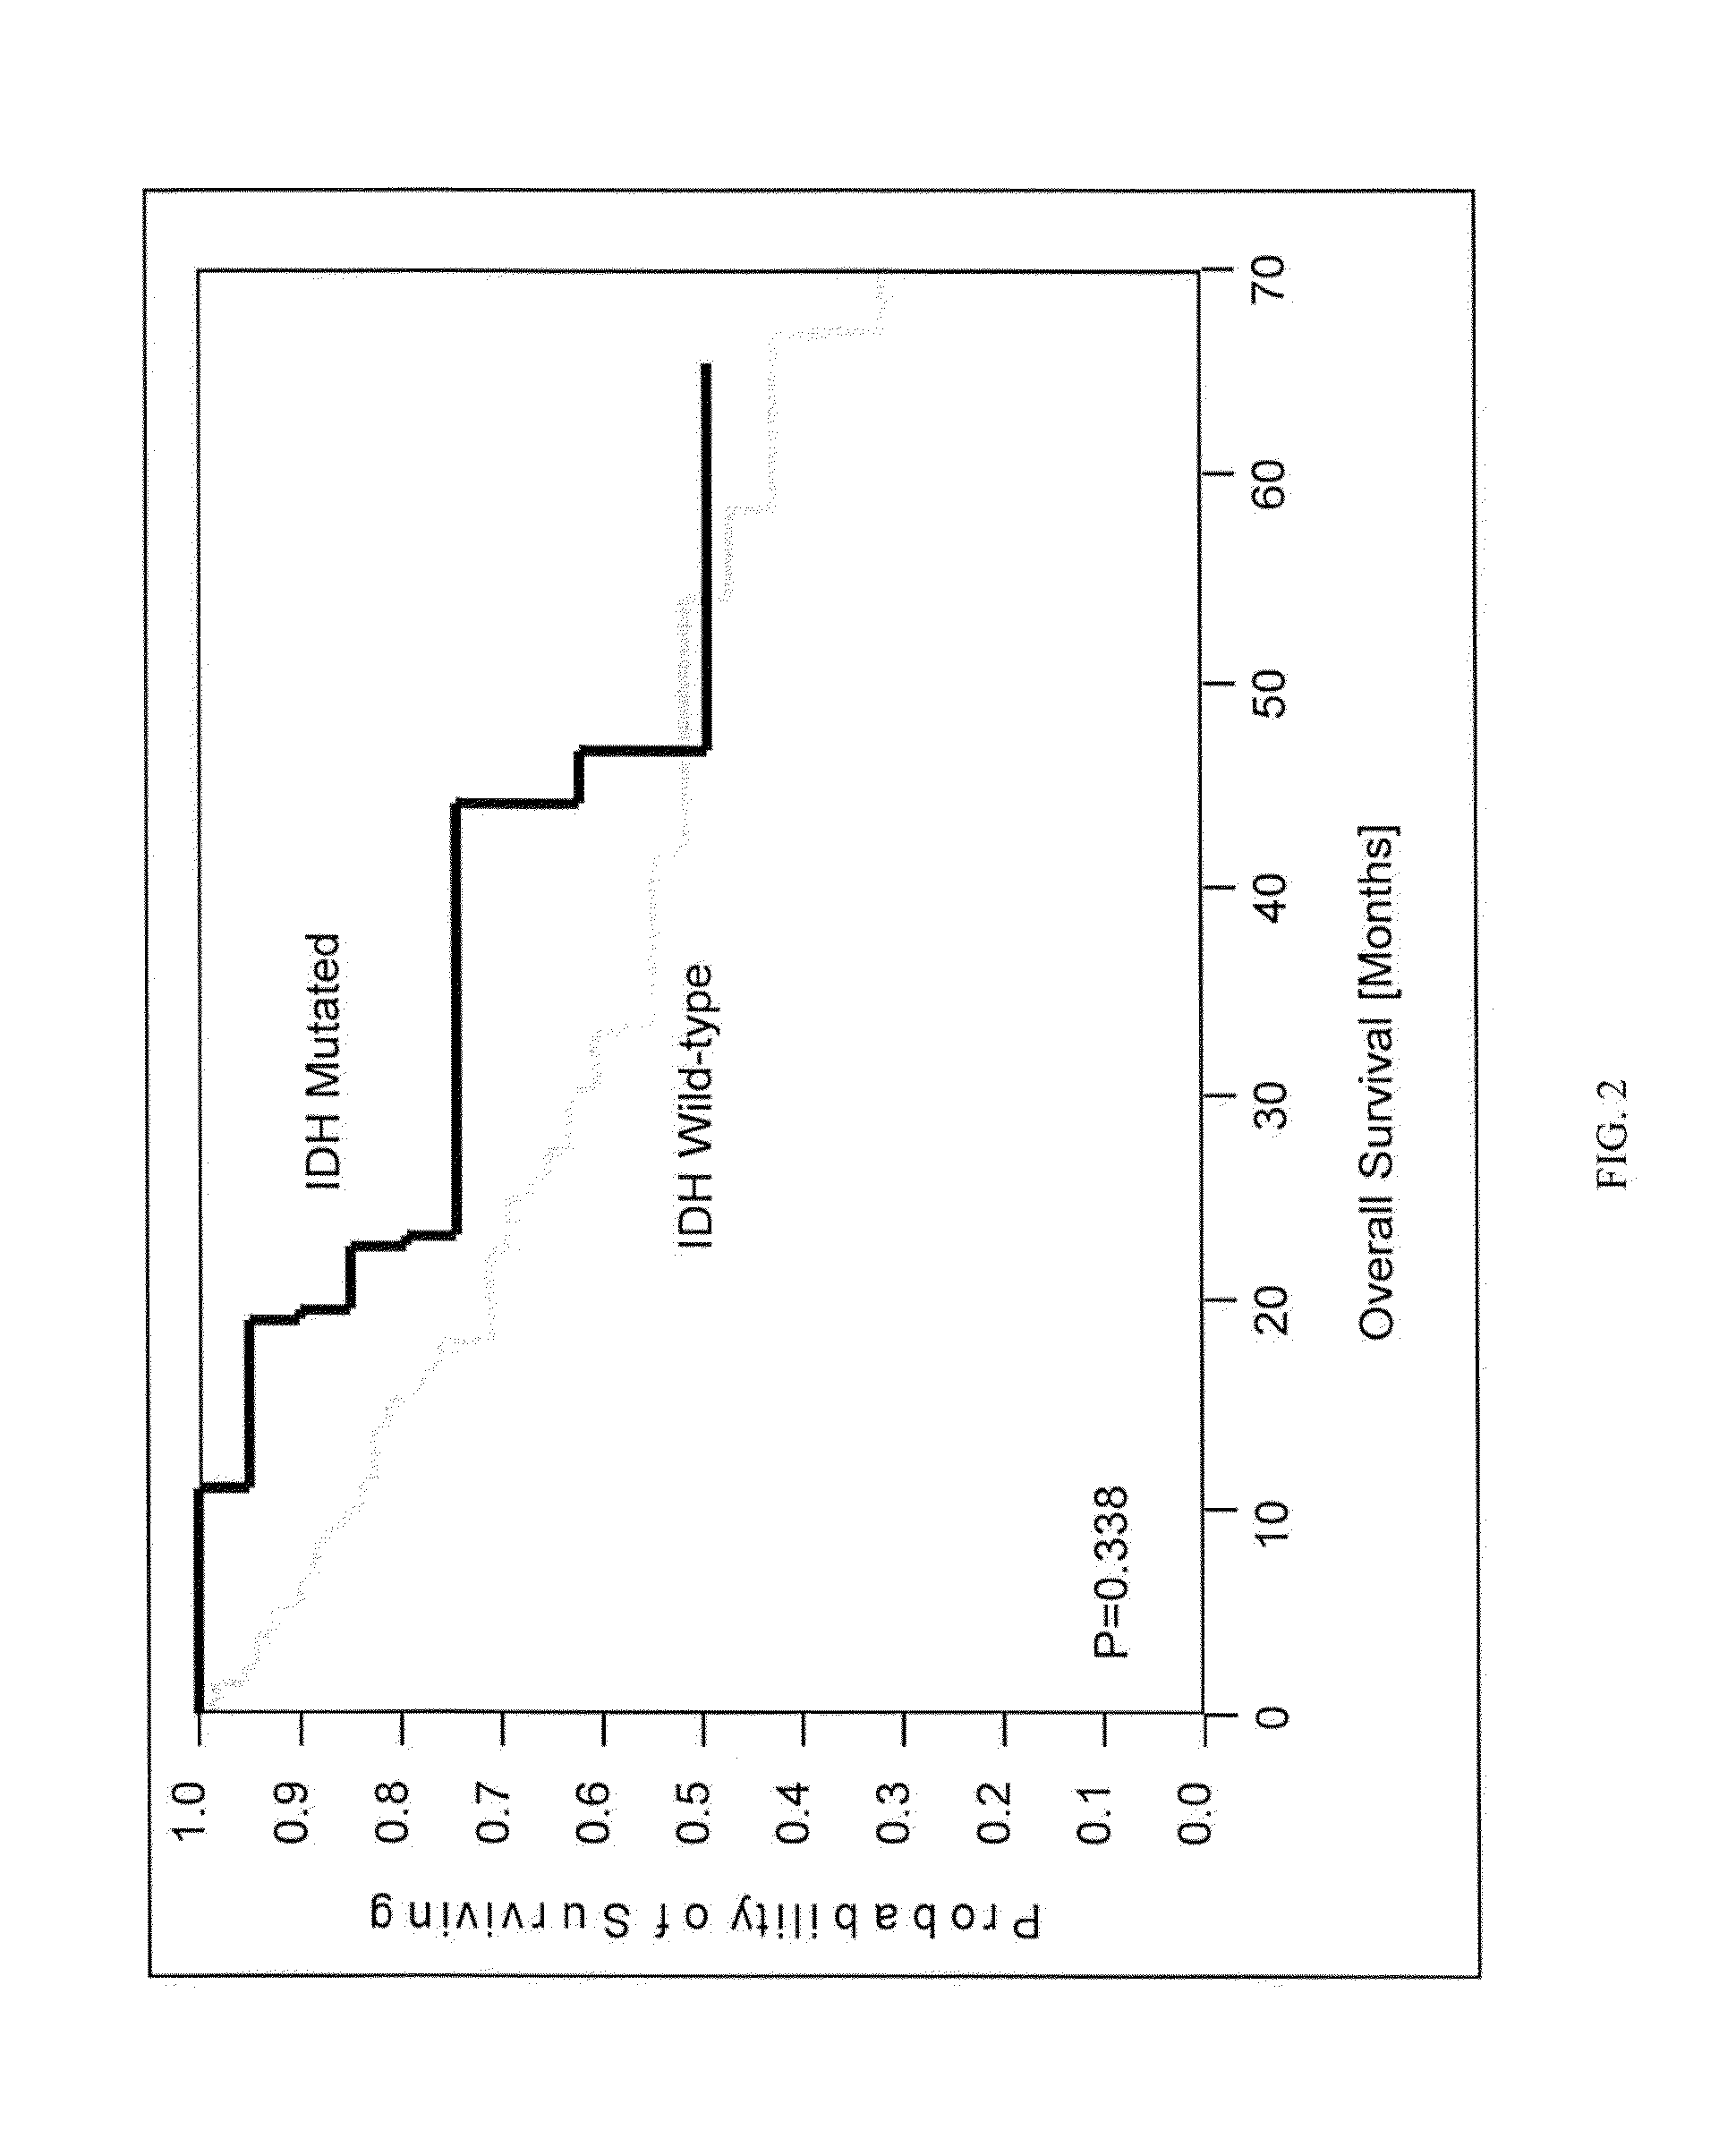 IDH1 and IDH2 mutations in cholangiocarcinoma